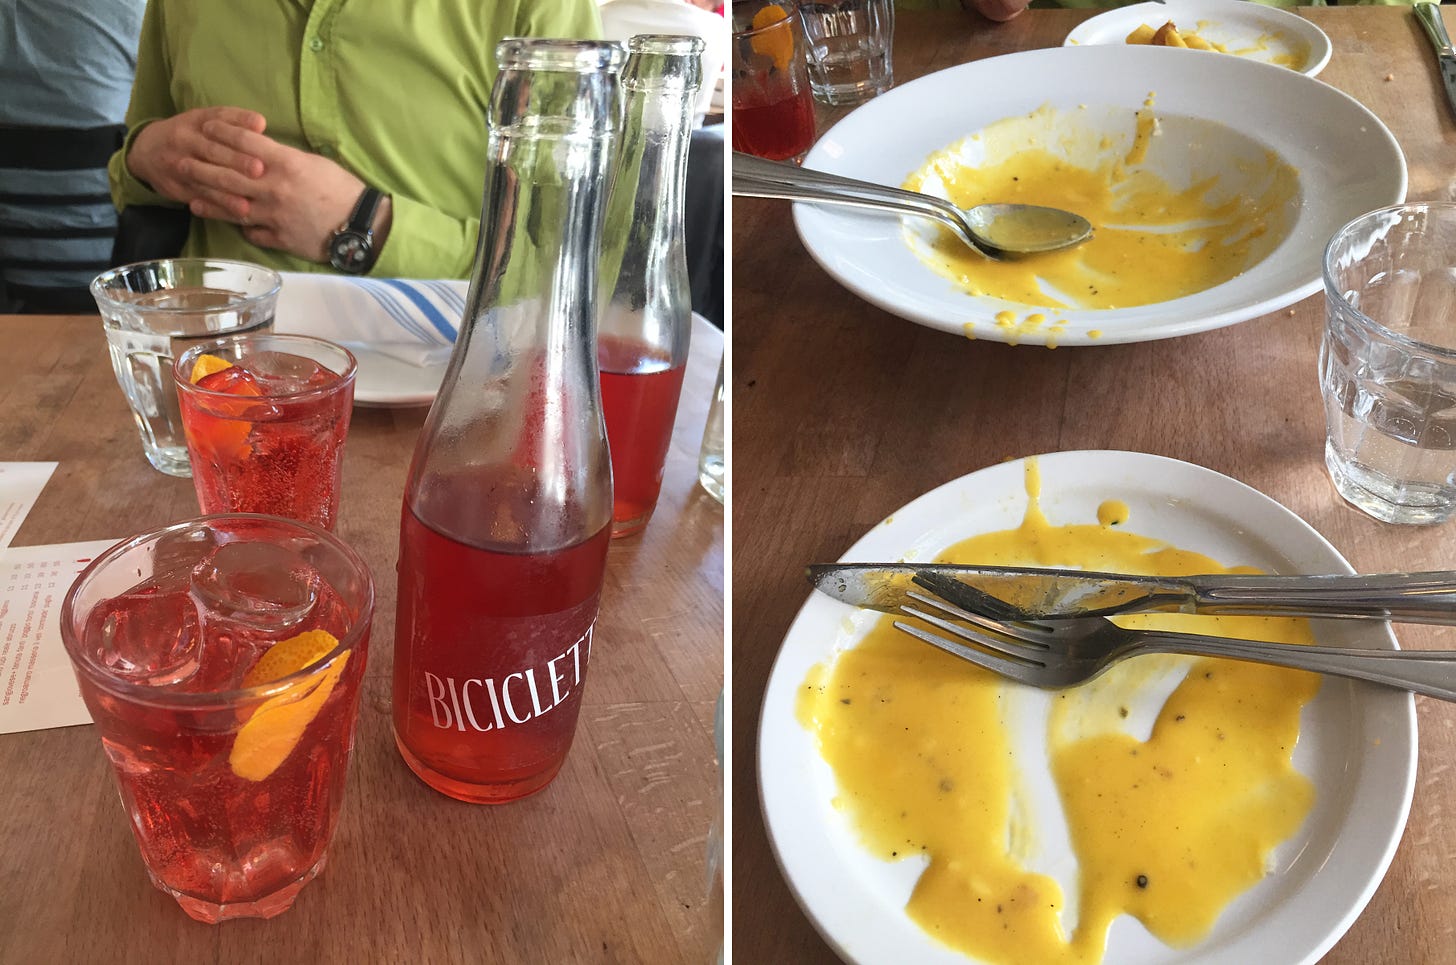 Left image: two small bottles full of light red bicicletta, and small glasses of the same next to them. Right image: two empty side plates and an empty white serving bowl, all with utensils on top and the remnants of a creamy yellow sauce with black pepper.